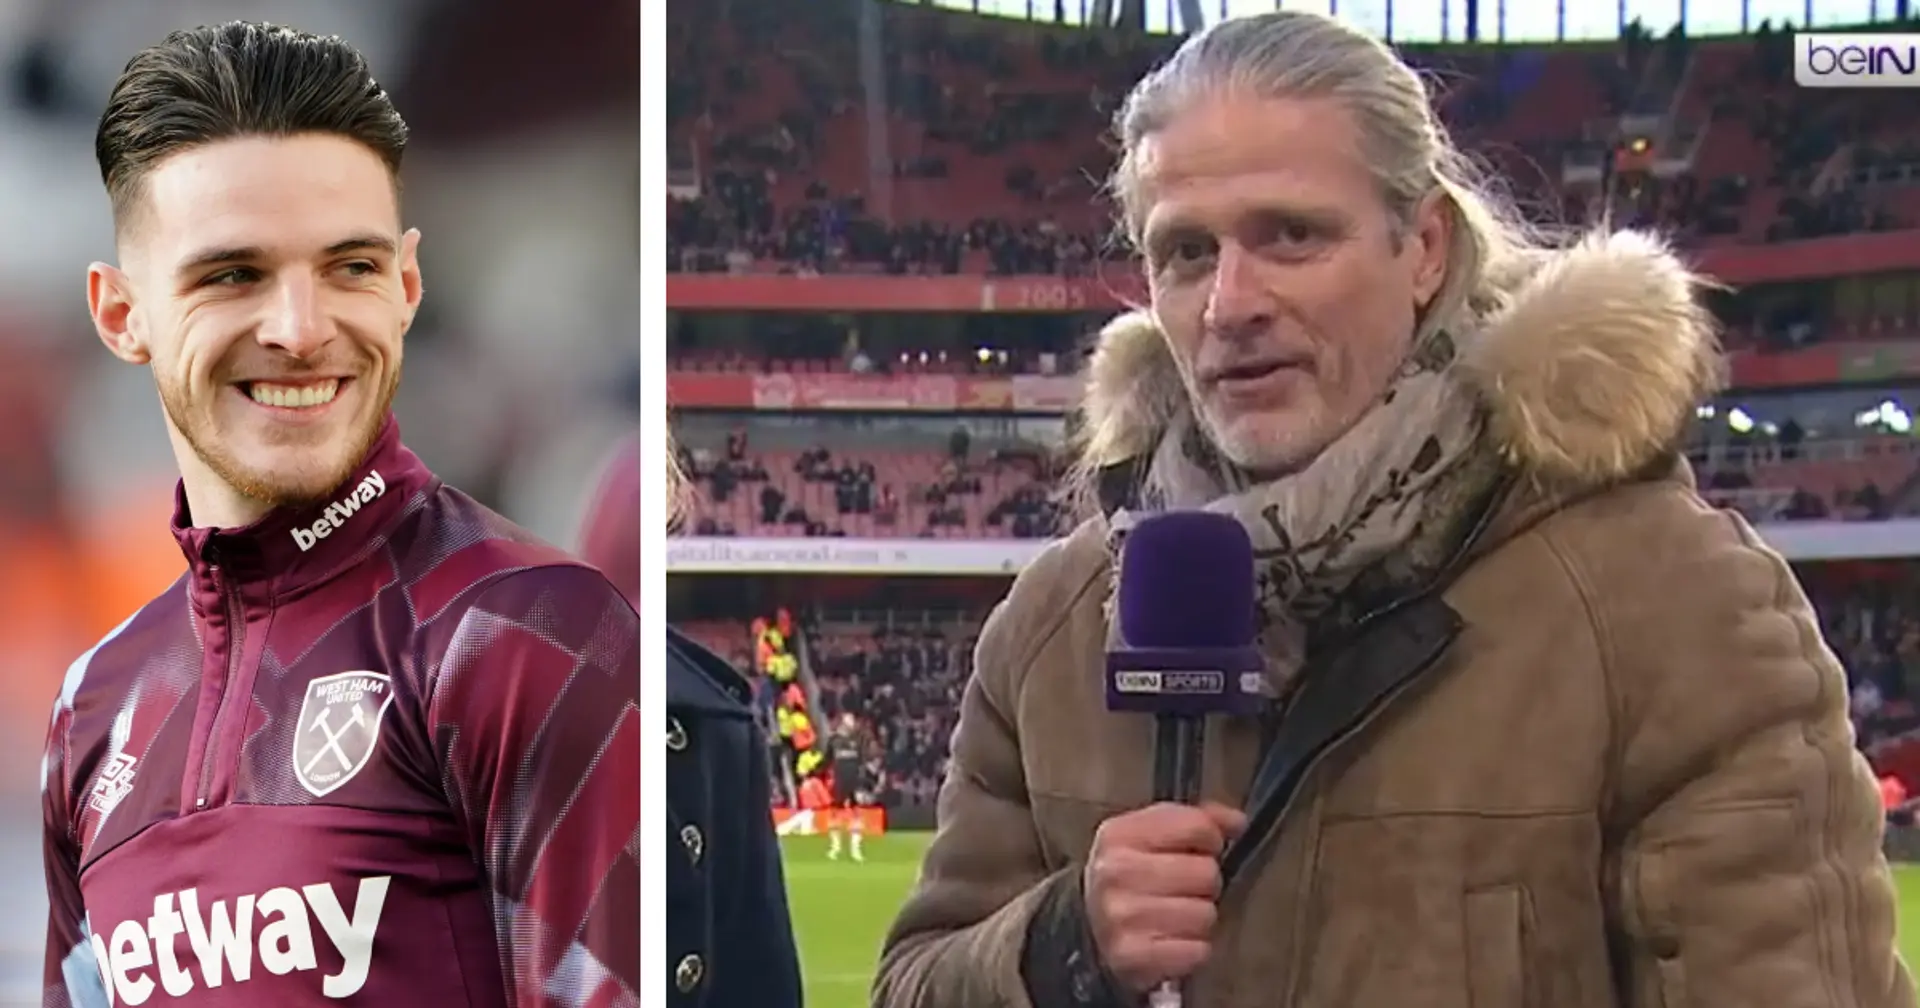 'If you want to win silverware, you have to come Arsenal!': Emmanuel Petit sends message to Declan Rice